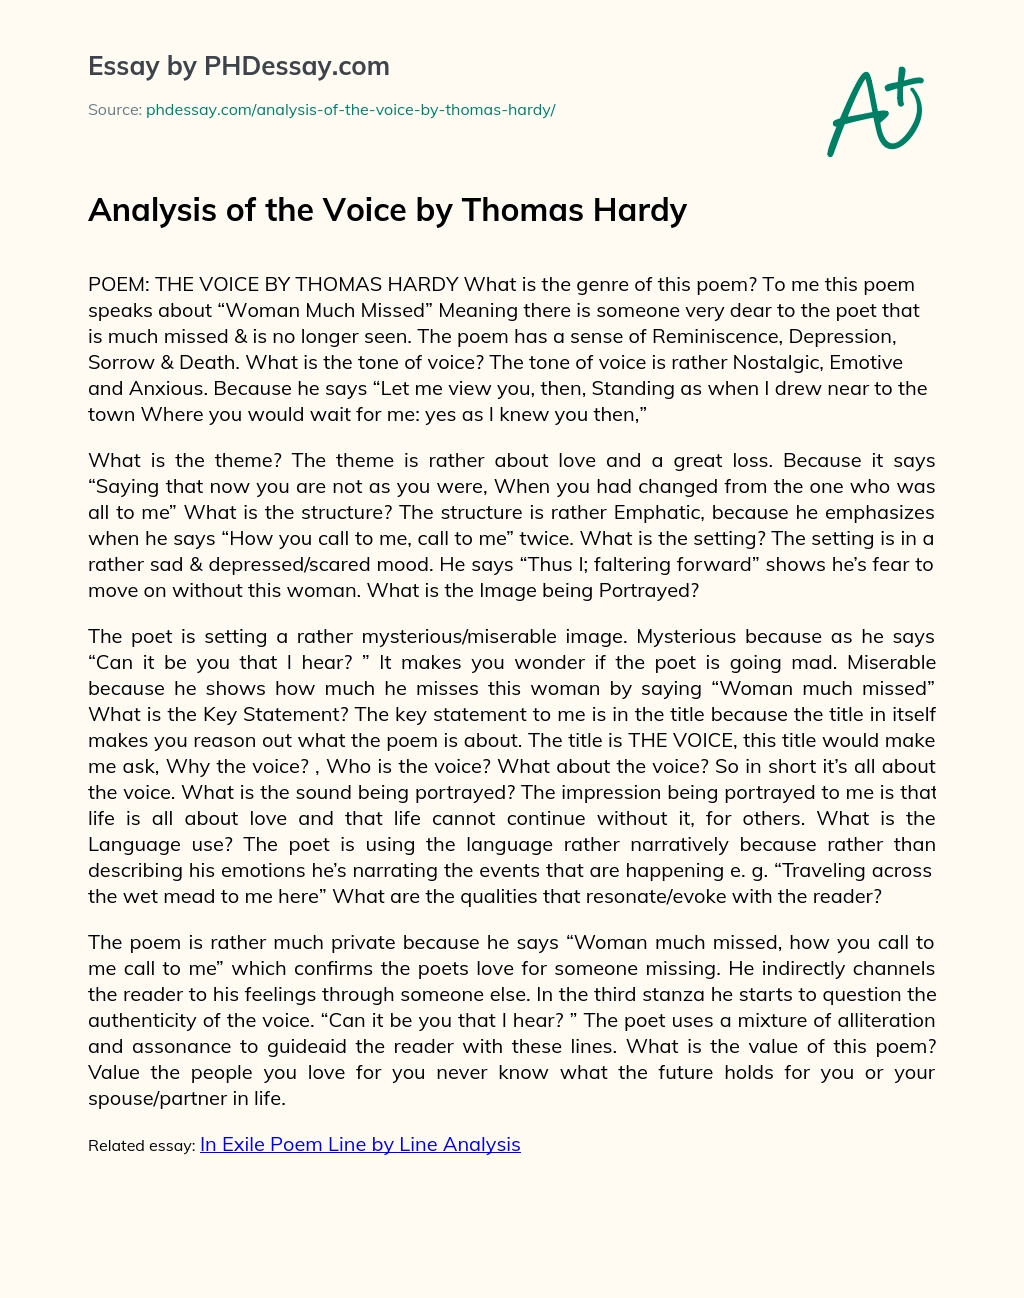 Analysis of the Voice by Thomas Hardy essay